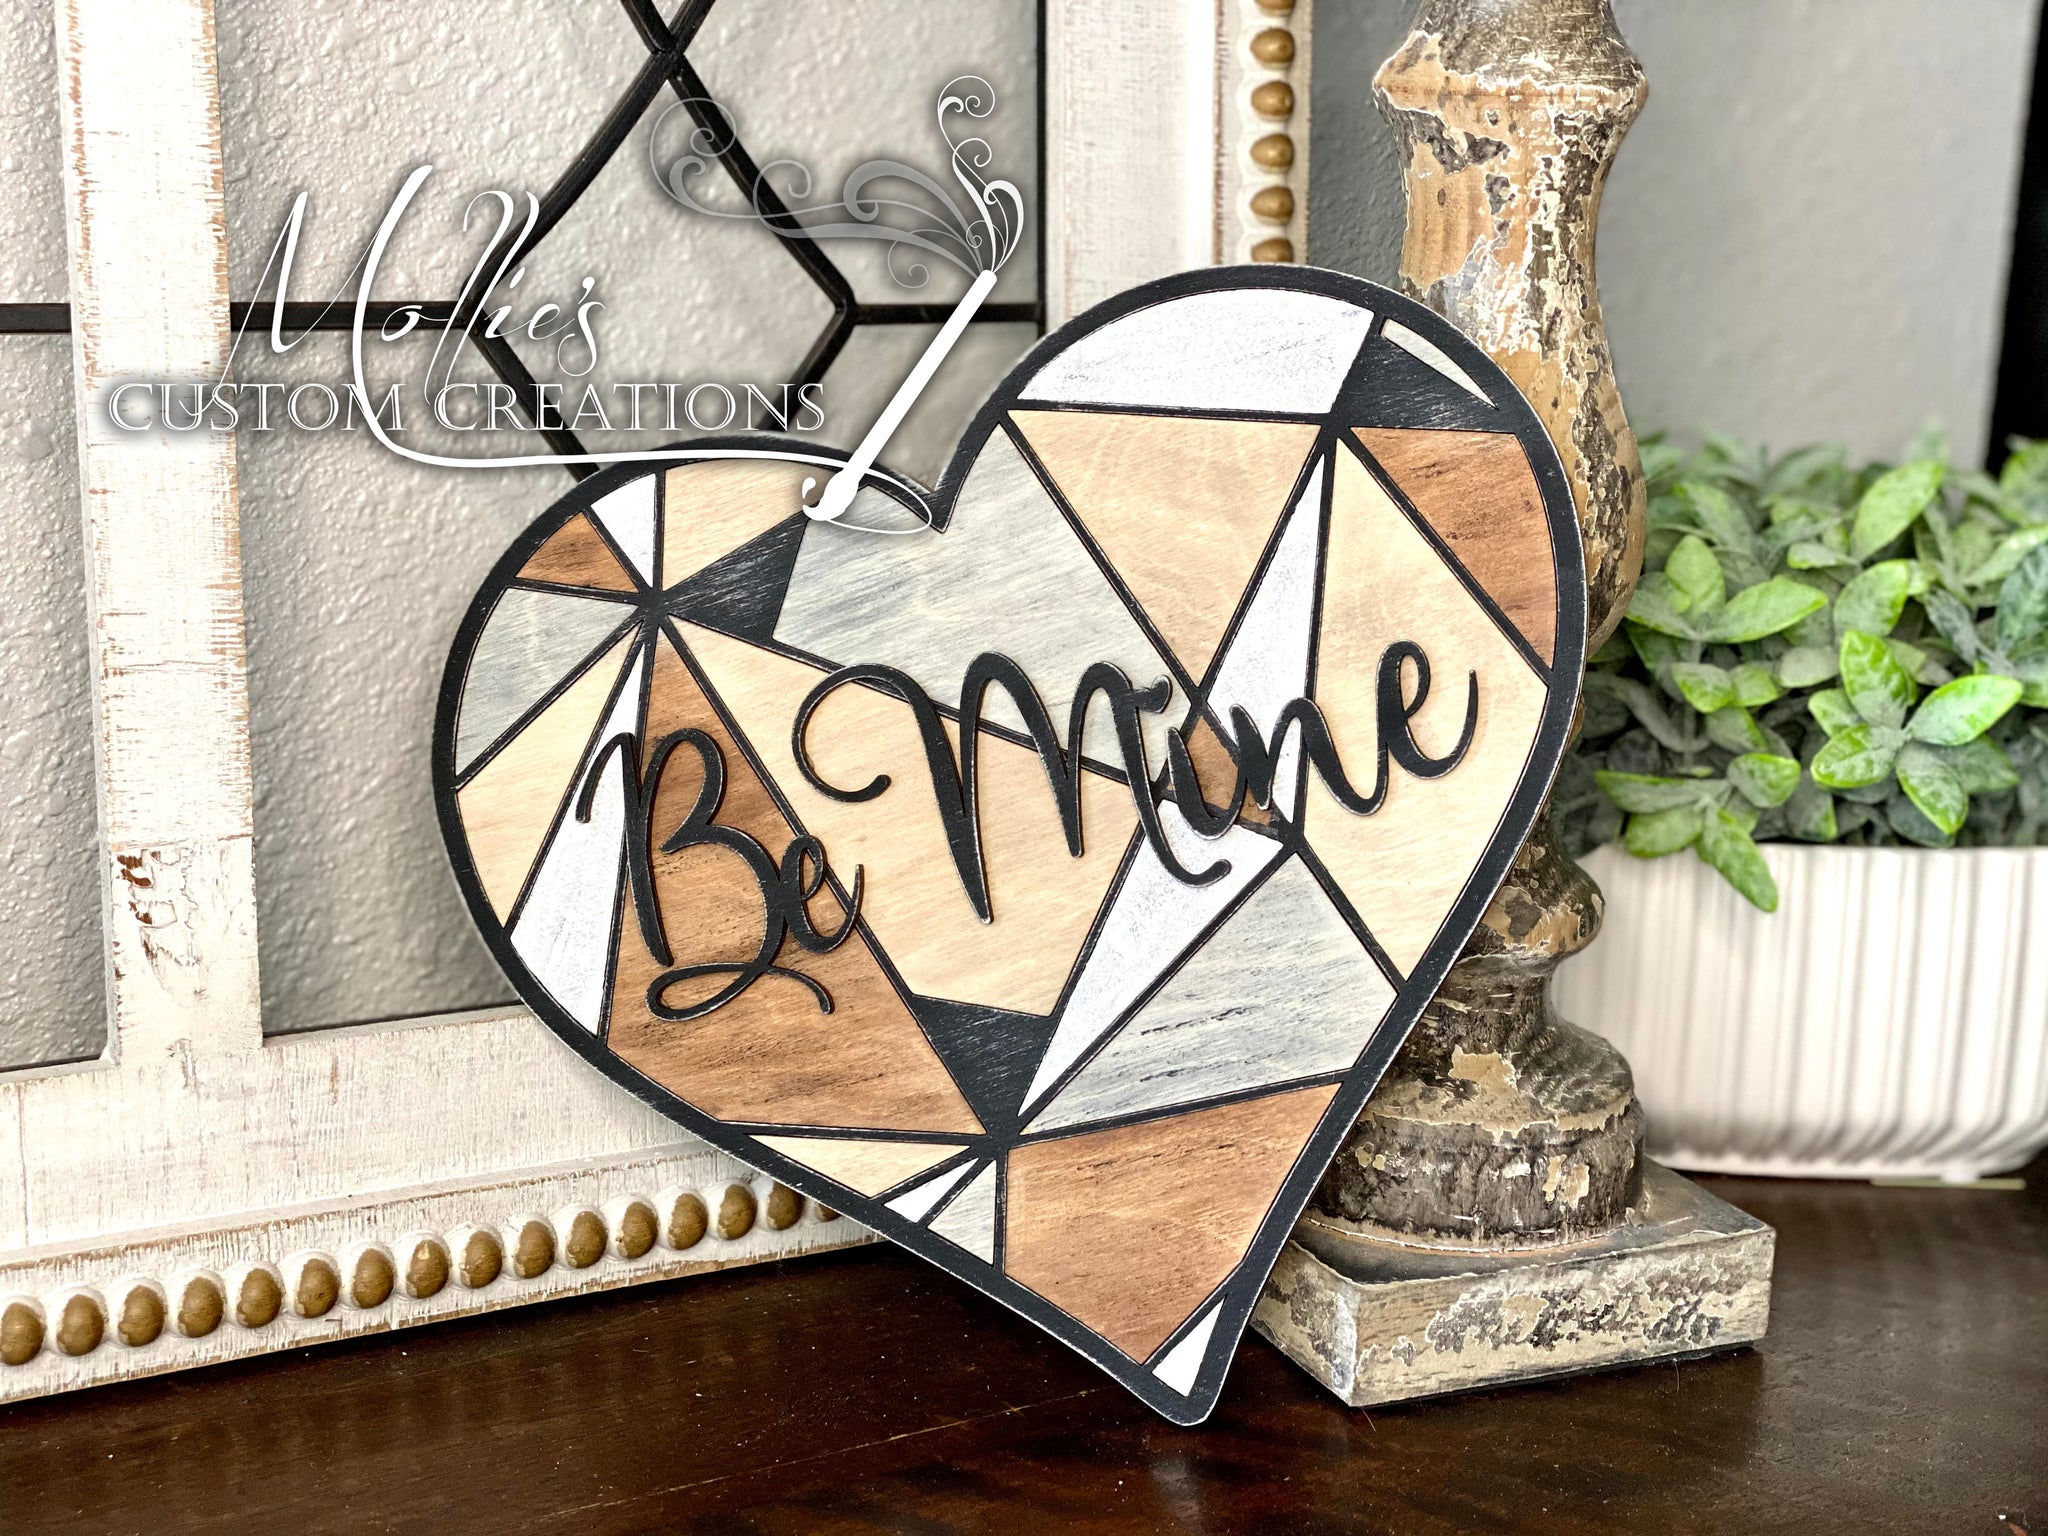 Unfinished Wooden Heart Crafts, Wooden Scrapbooking Crafts